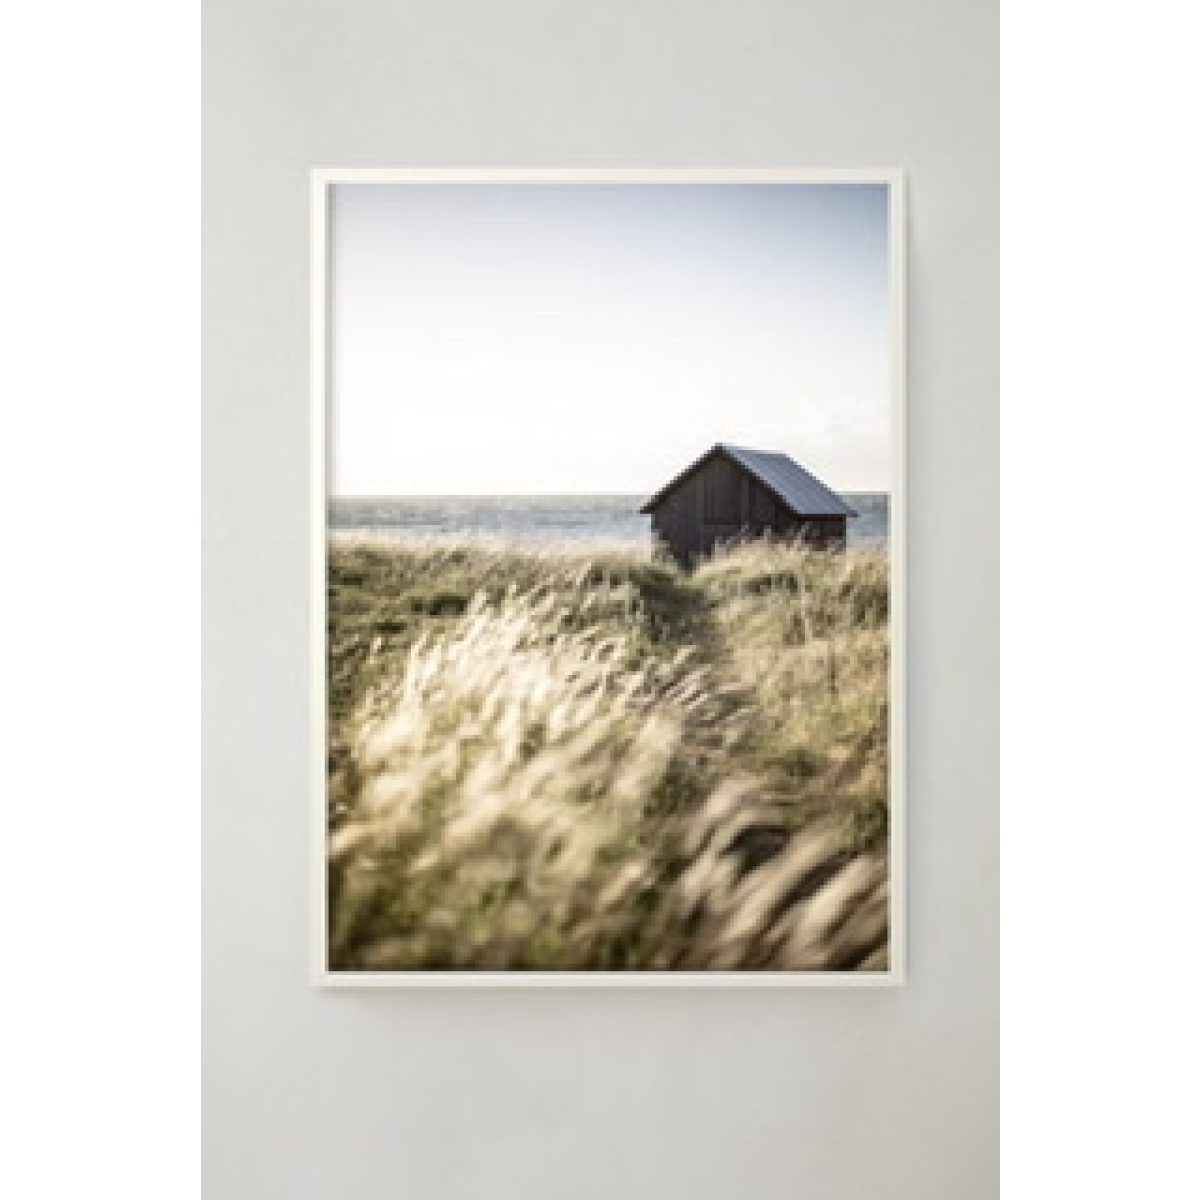 Gray Barn Poster 30x40 cm Storefactory My Home and More